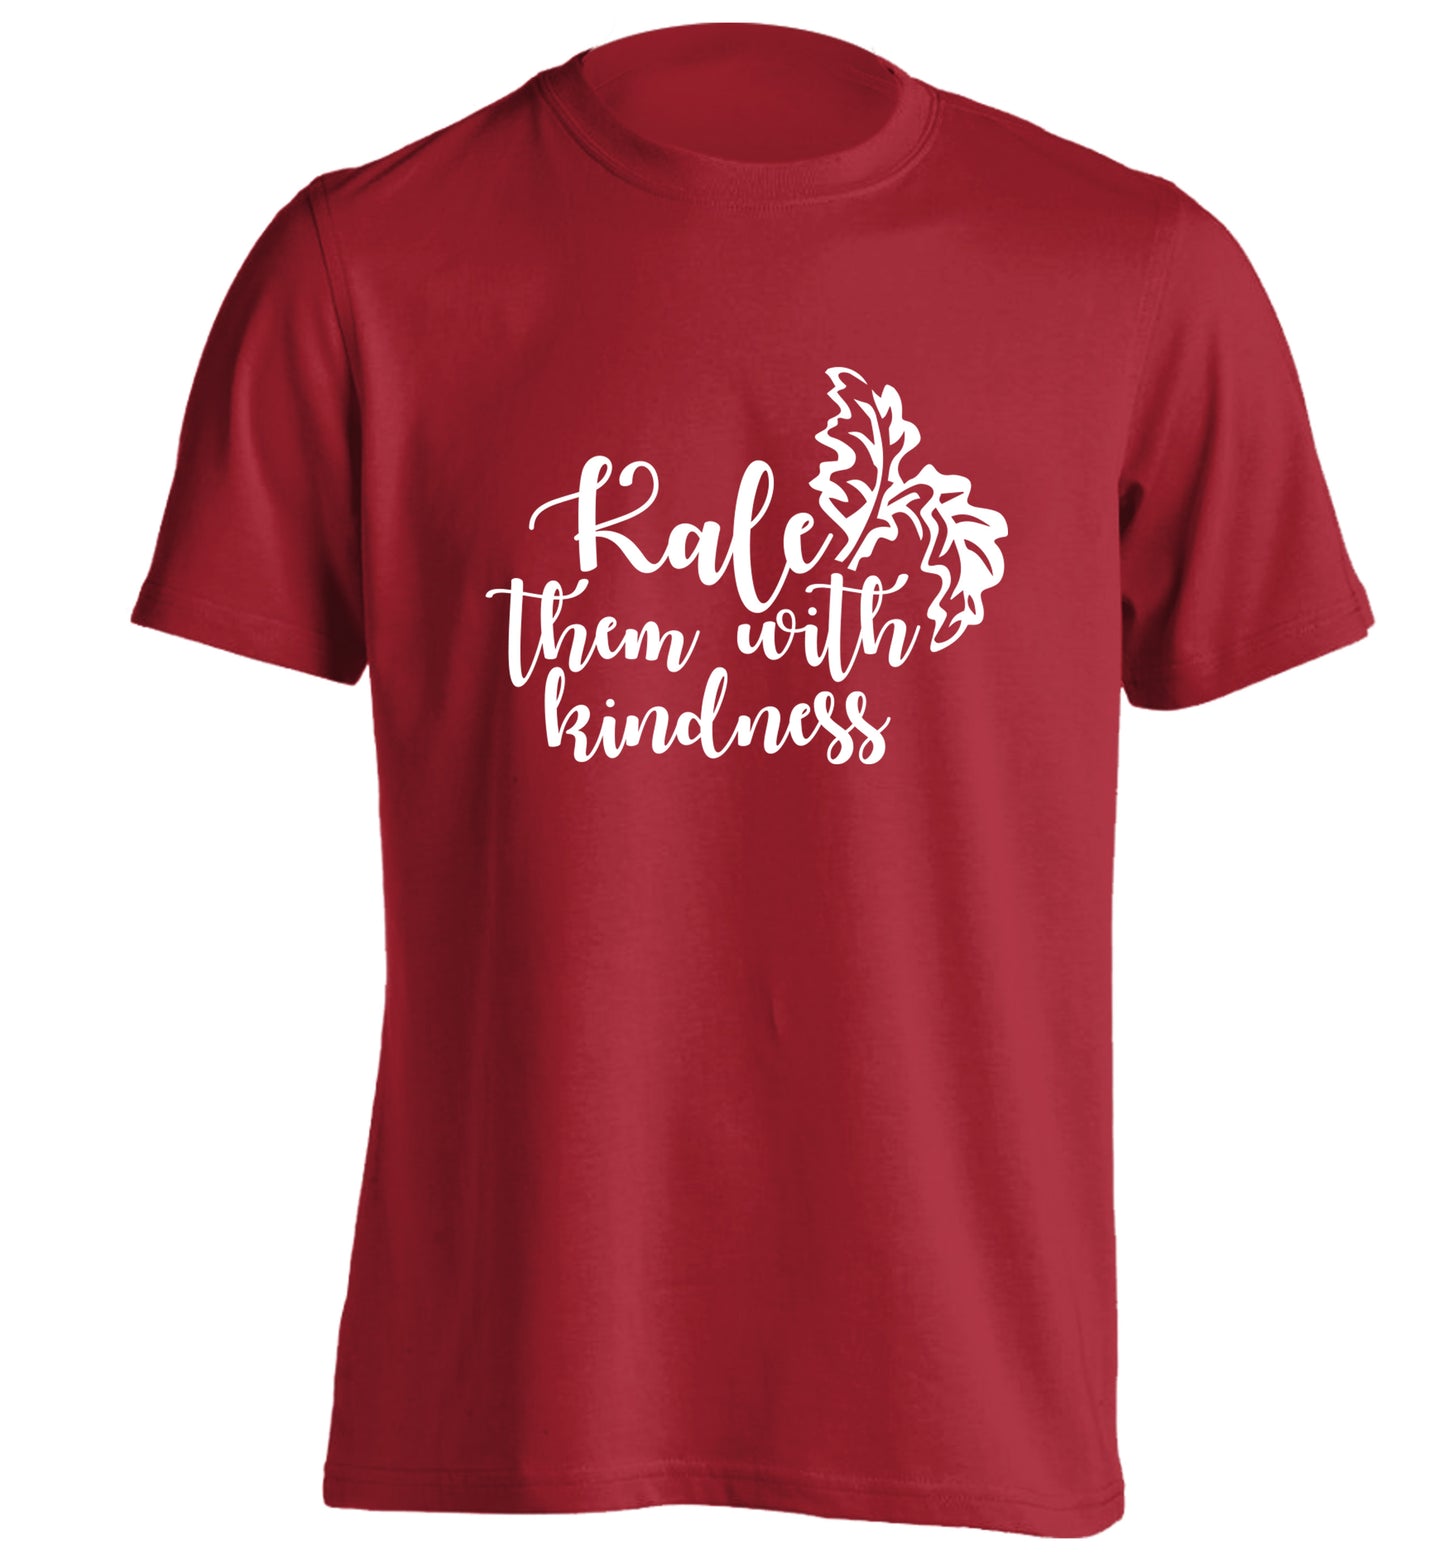 Kale them with kindness adults unisex red Tshirt 2XL